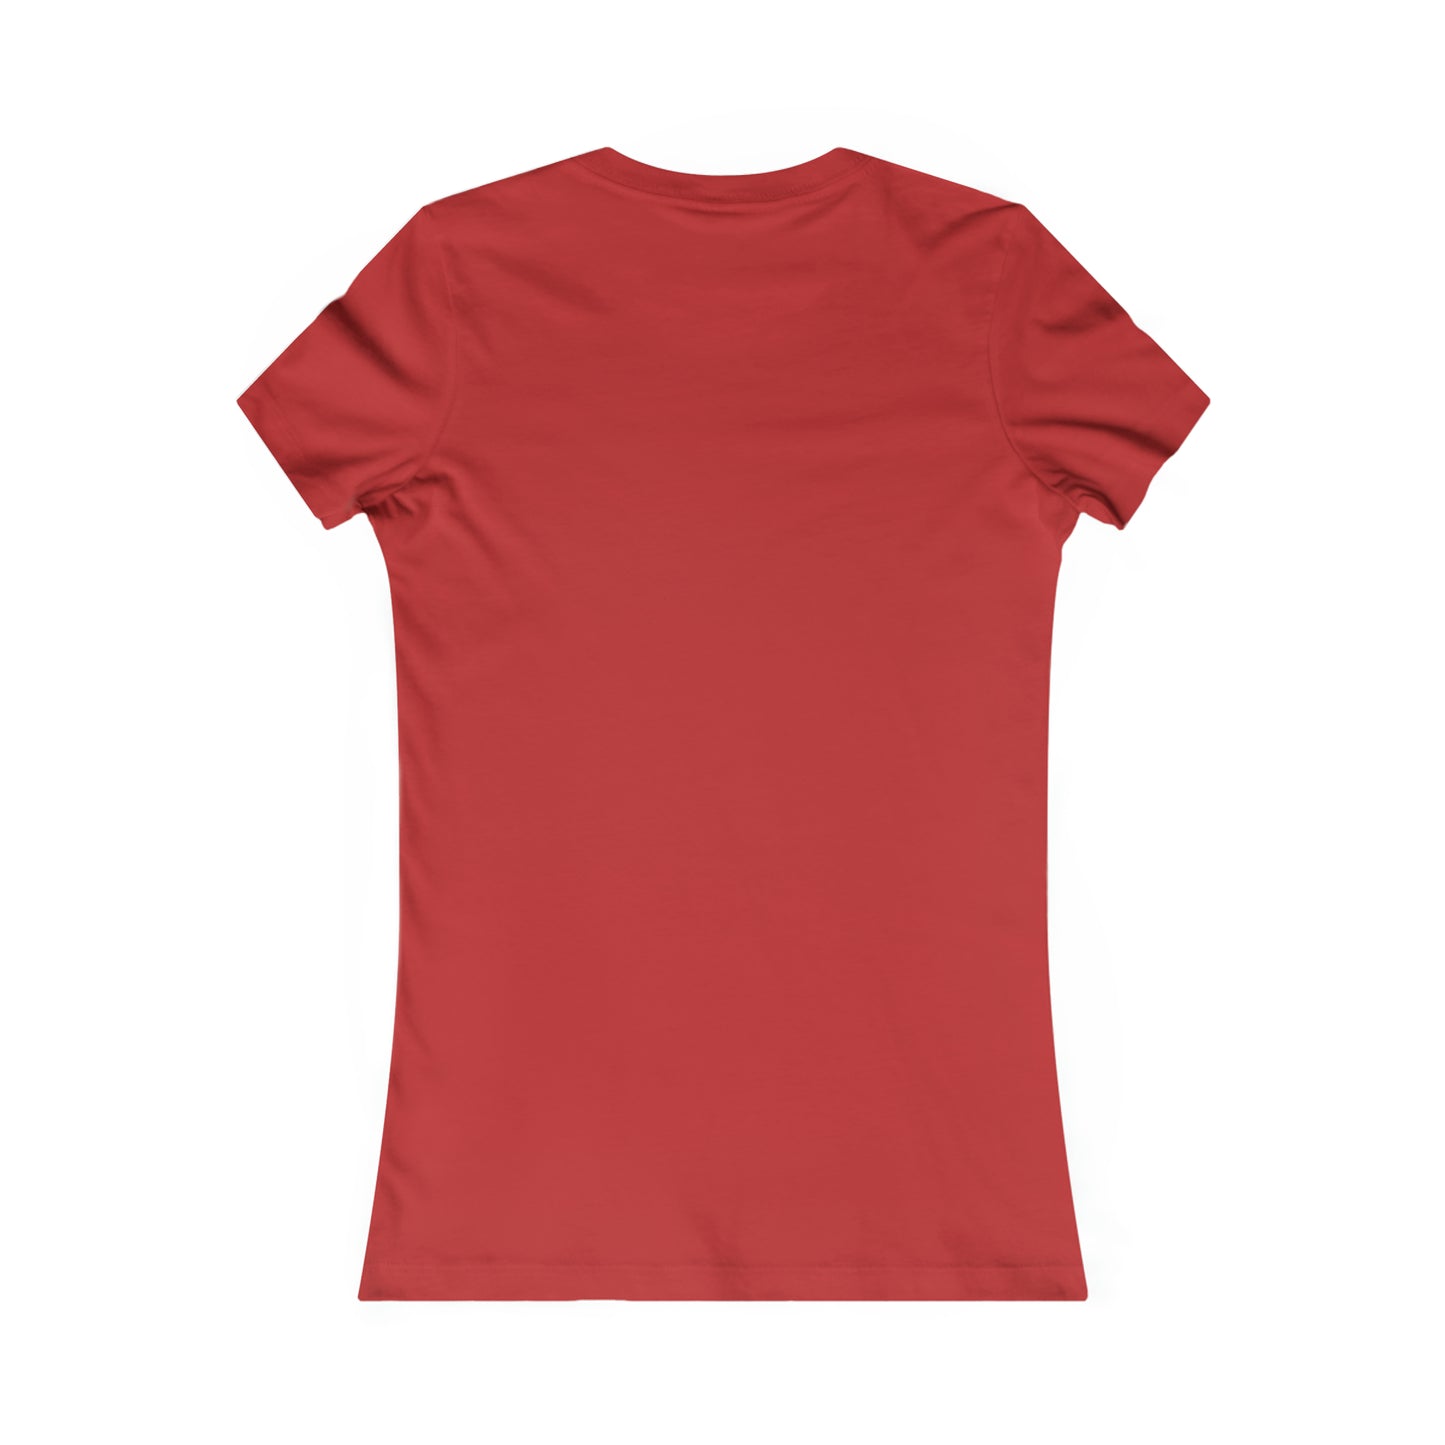 "Beards & Curves Women's Tee Shirts - Perfect Blend of Comfort & Style"